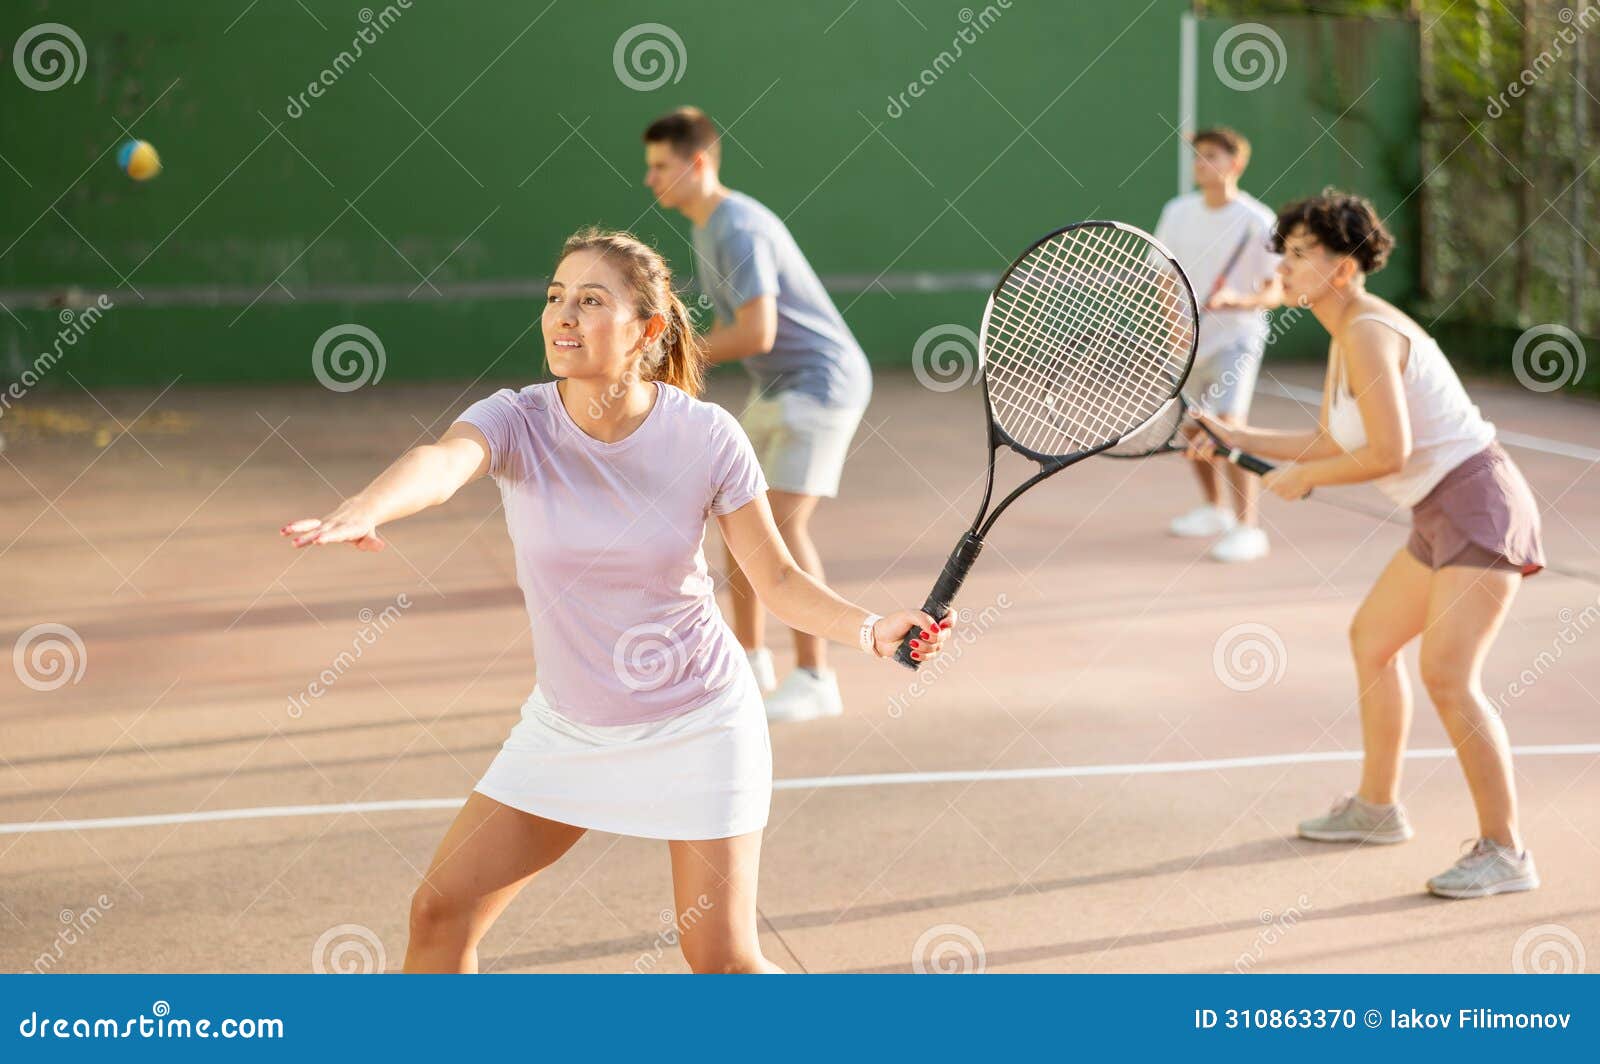 woman playing frontenis on outdoor pelota court